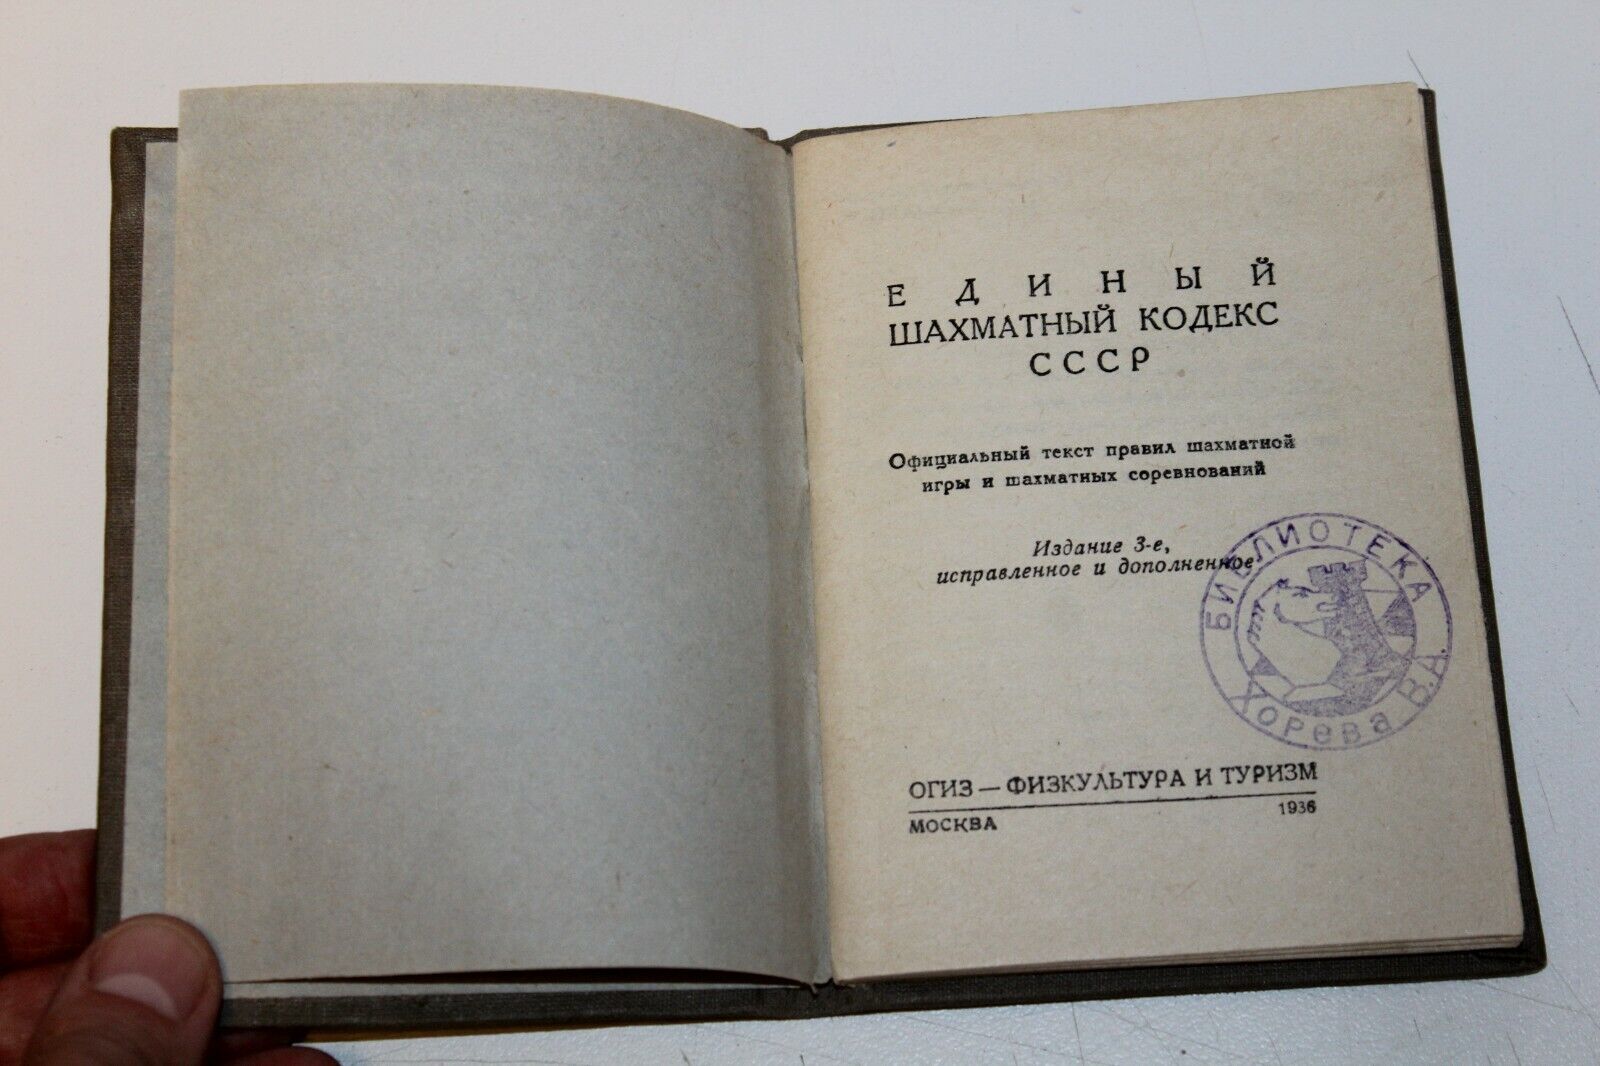 11076.Chess book: Horev library. N.Zubarev. 1936 Unified chess code of the USSR